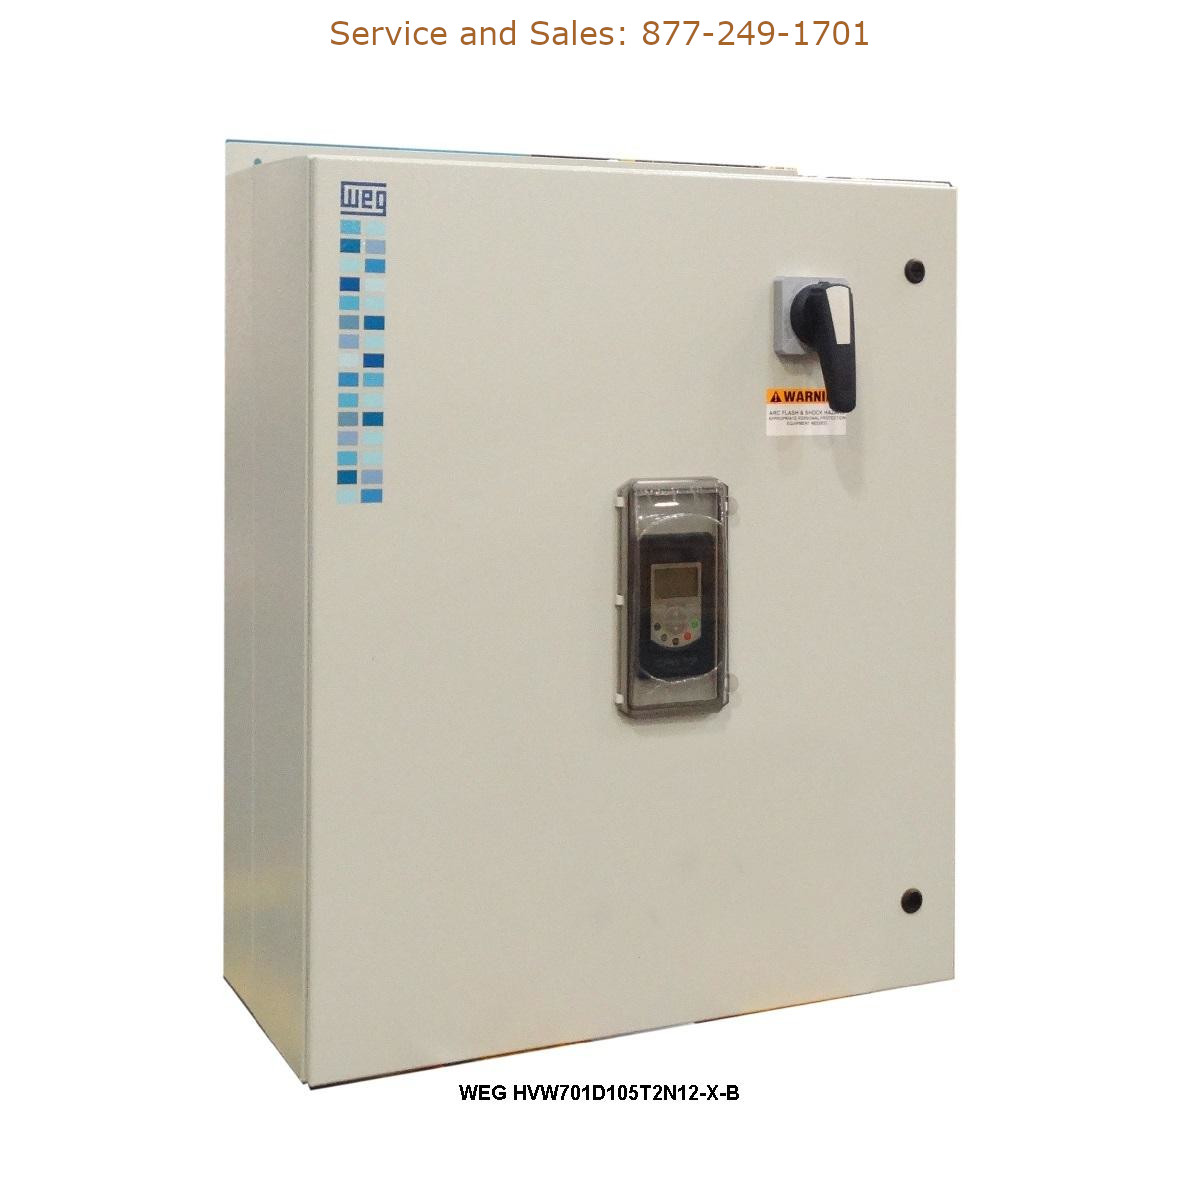 WEG HVW701D105T2N12-X-B WEG Model Number HVW701D105T2N12-X-B WEG Drives, Variable Speed Drives Repair Service, Troubleshooting, Replacement Parts https://gesrepair.com/wp-content/uploads/2022/WEG/WEG_HVW701D105T2N12-X-B_Drives_Variable_Speed_Drives.jpg